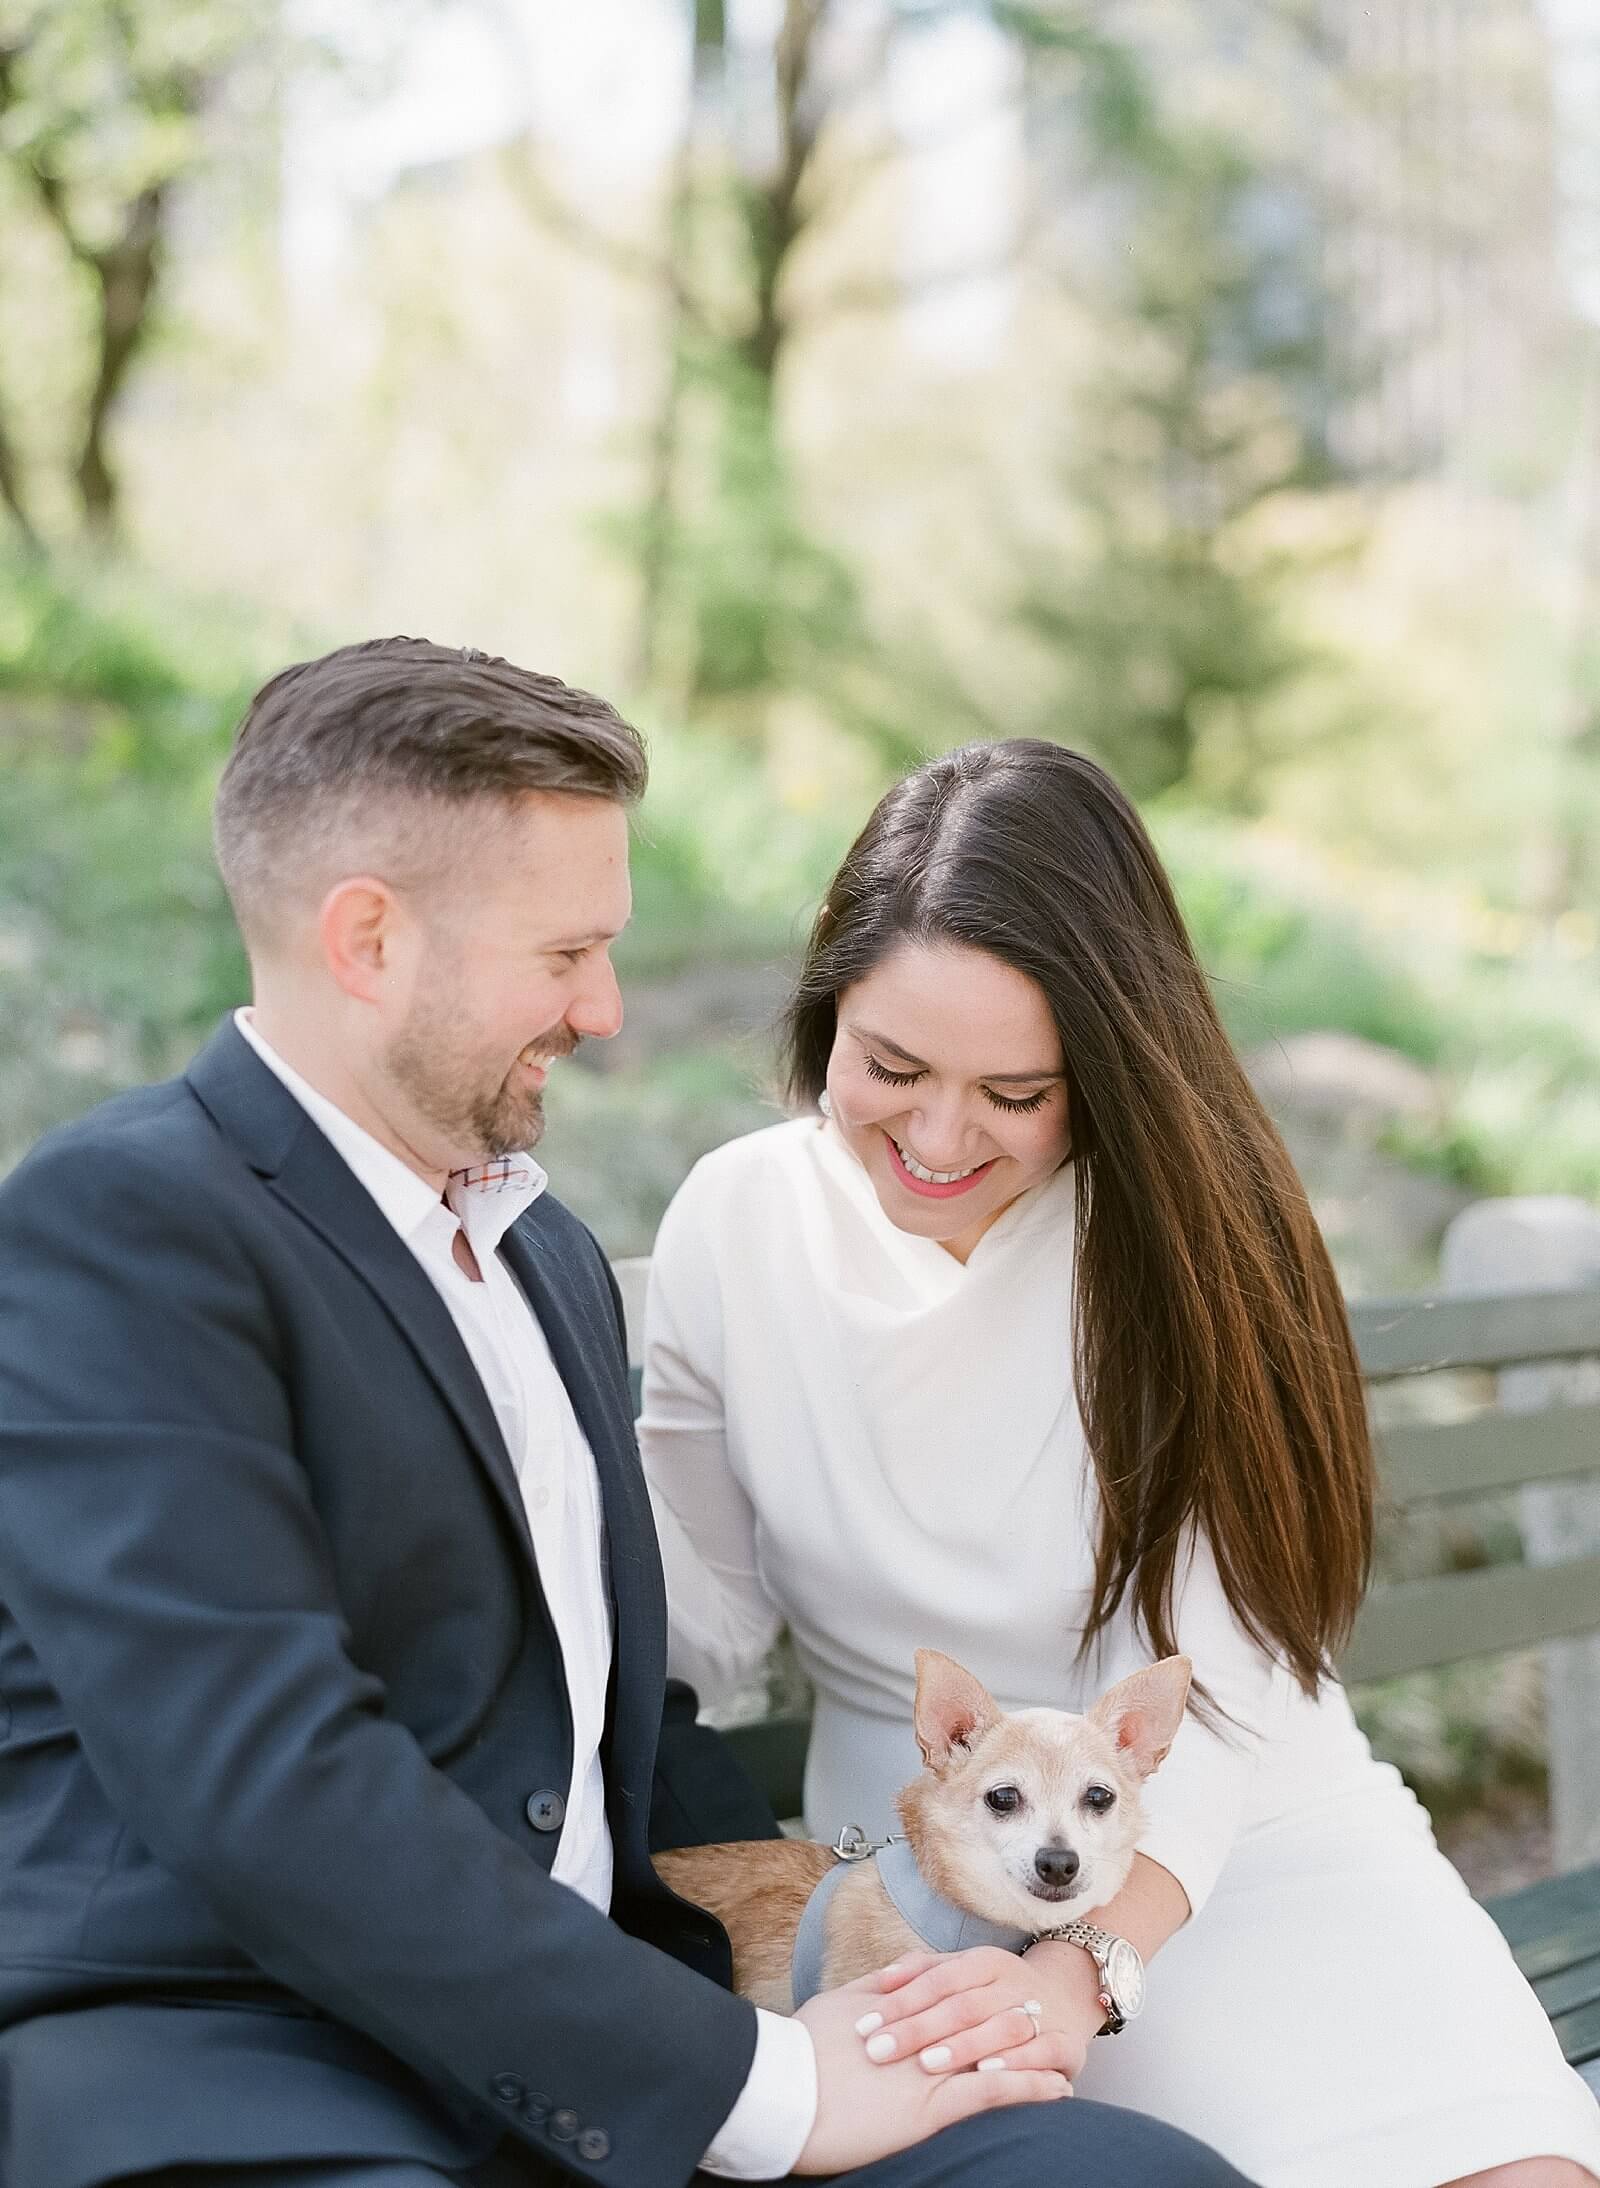 A couple with their dog during their engagement session in Central Park.